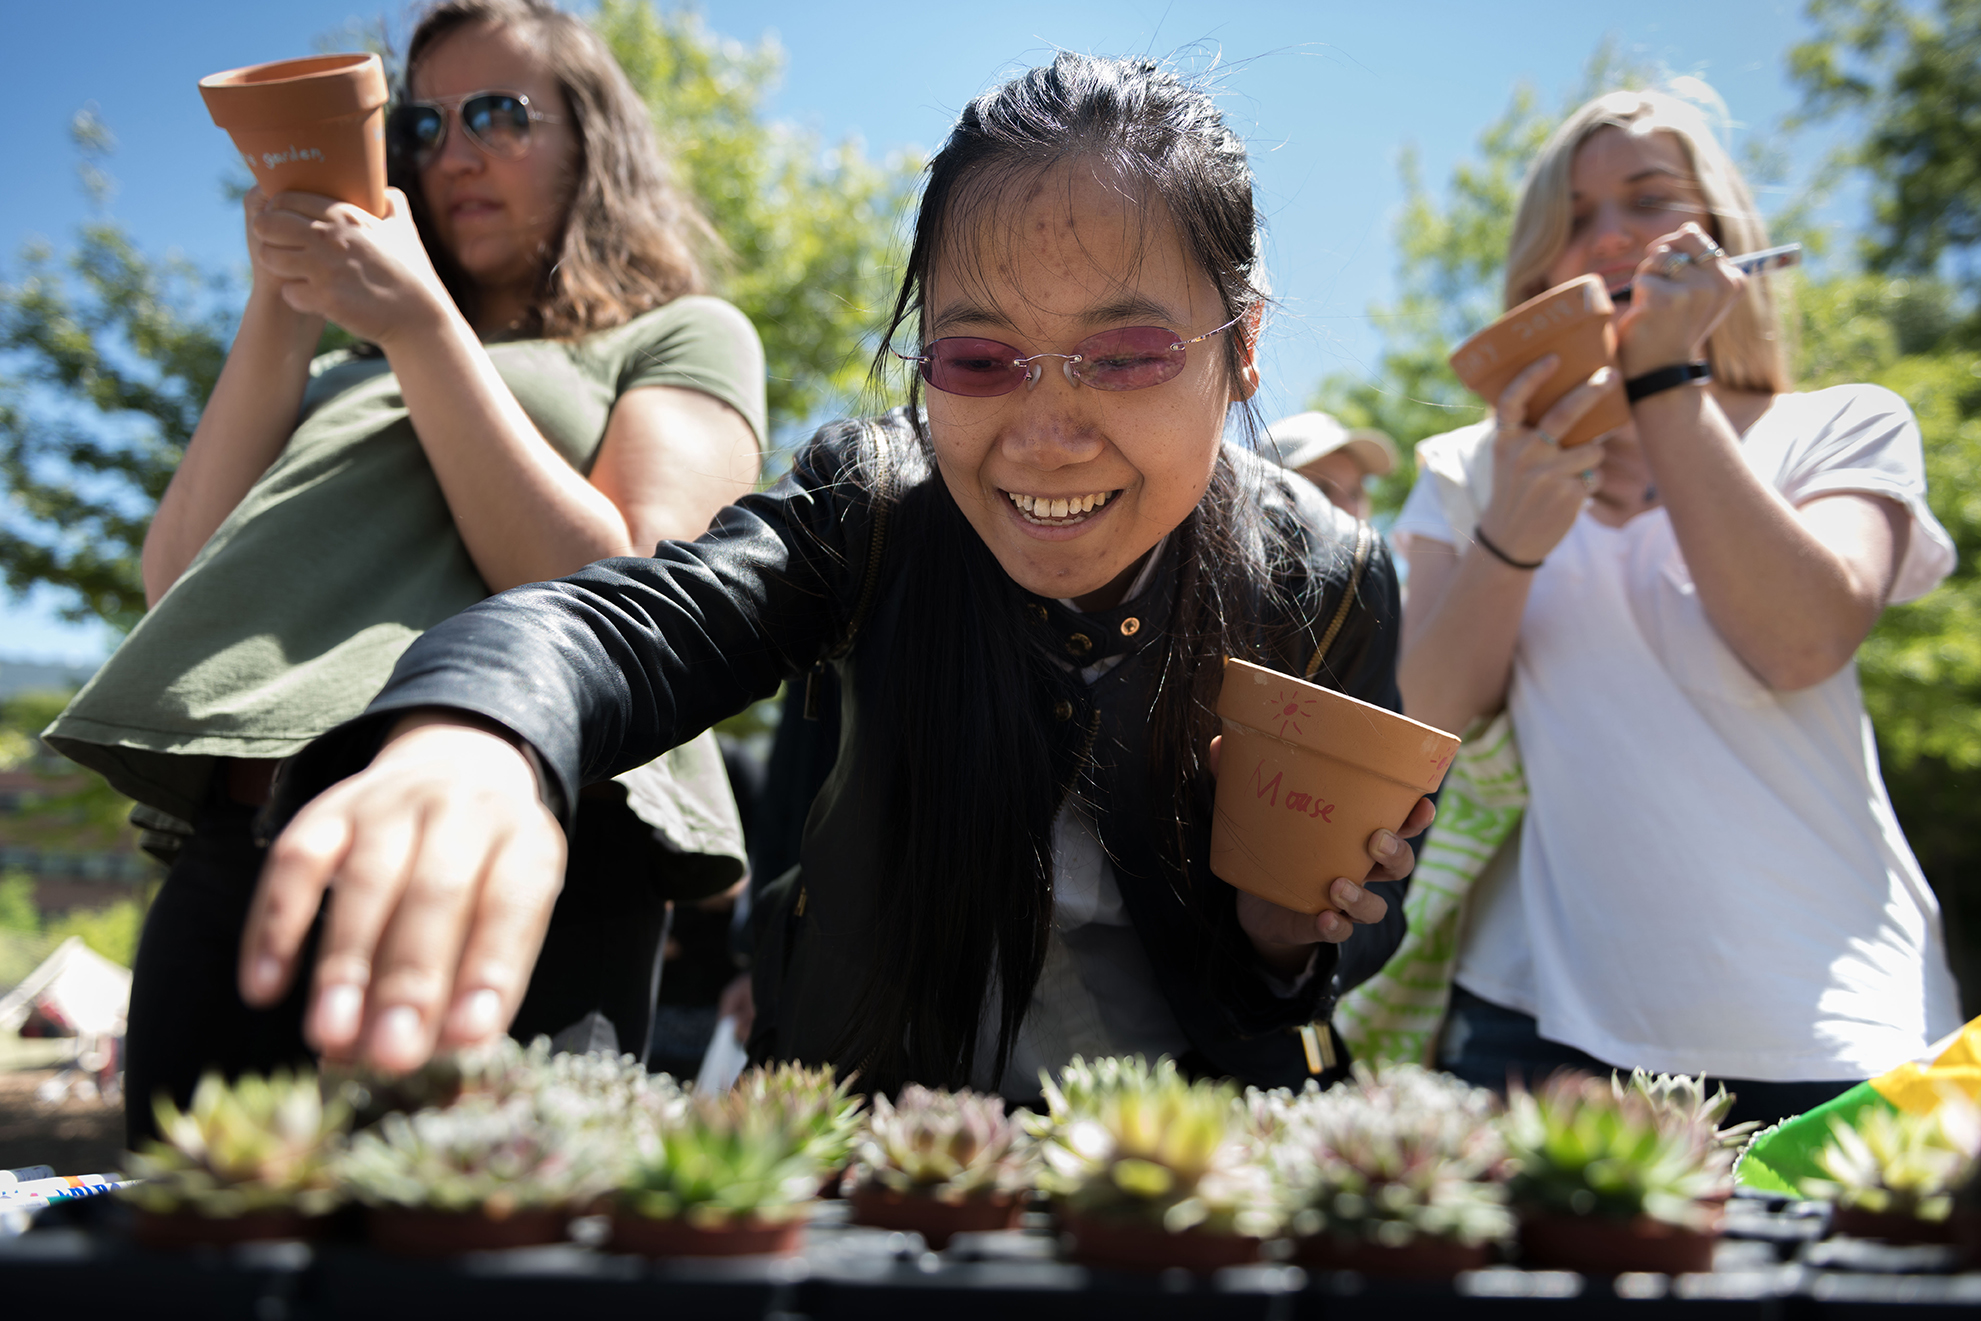 Students select succulents at a 2018 Earth Day event. Photo by Allison Carter